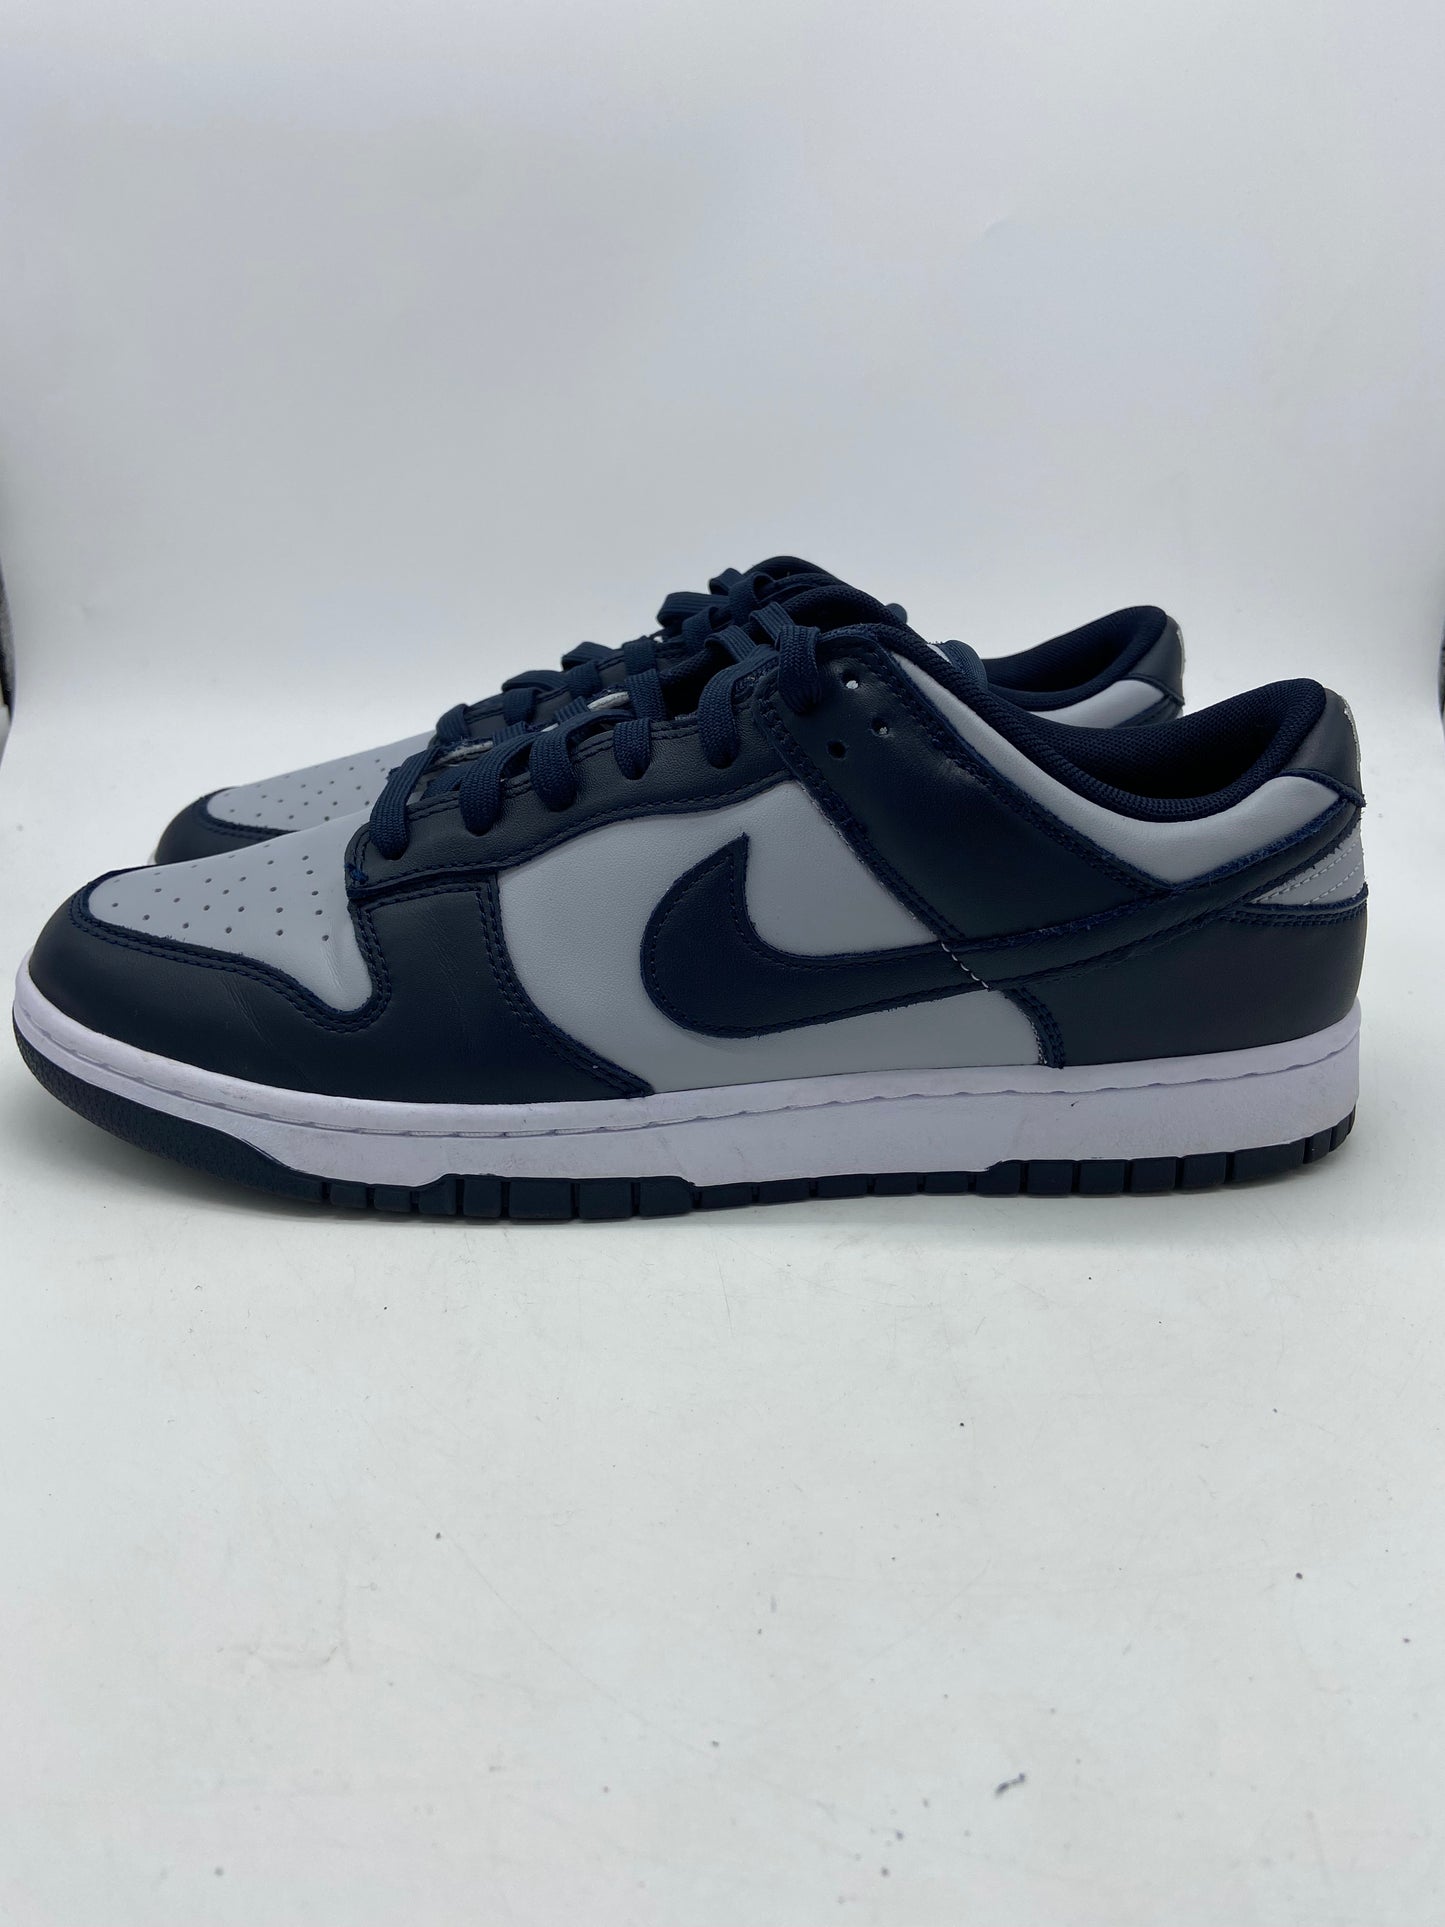 Preowned 2021 Nike Dunk Low 'Georgetown' Sz 12M/13.5W